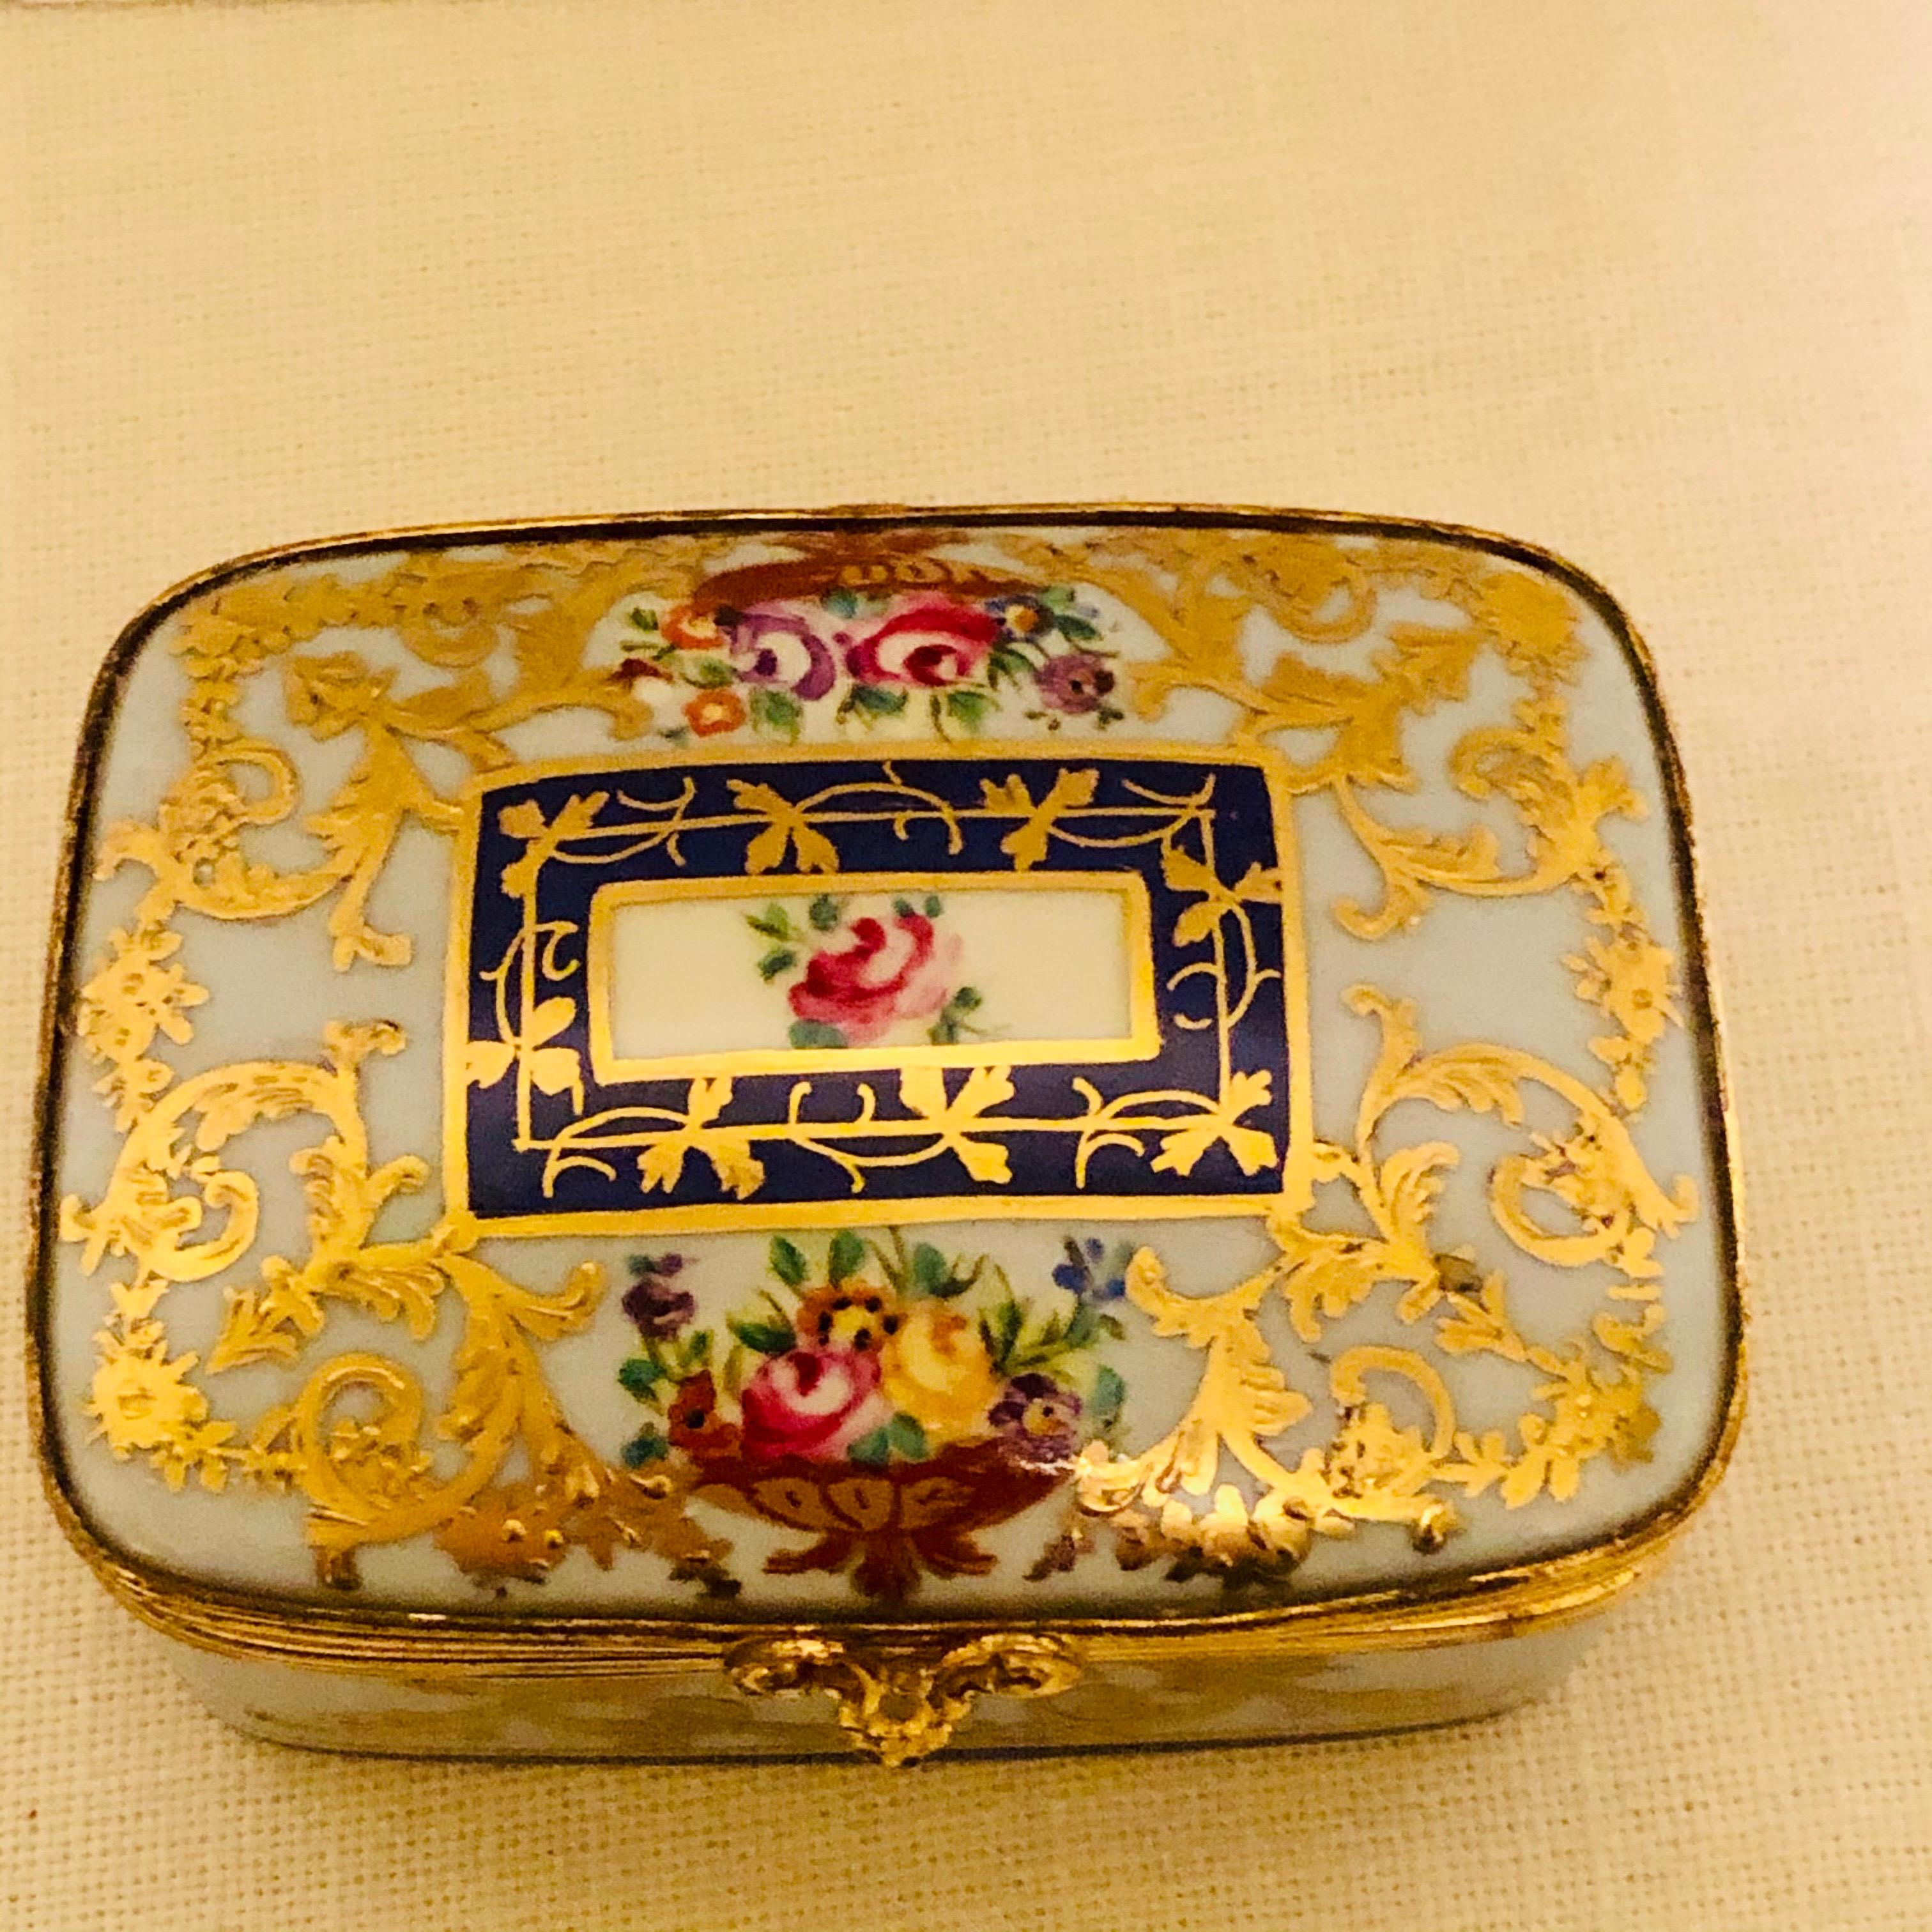 Le Tallec Porcelain Box with Decorated with Flower Bouquets and Raised Gilding 1